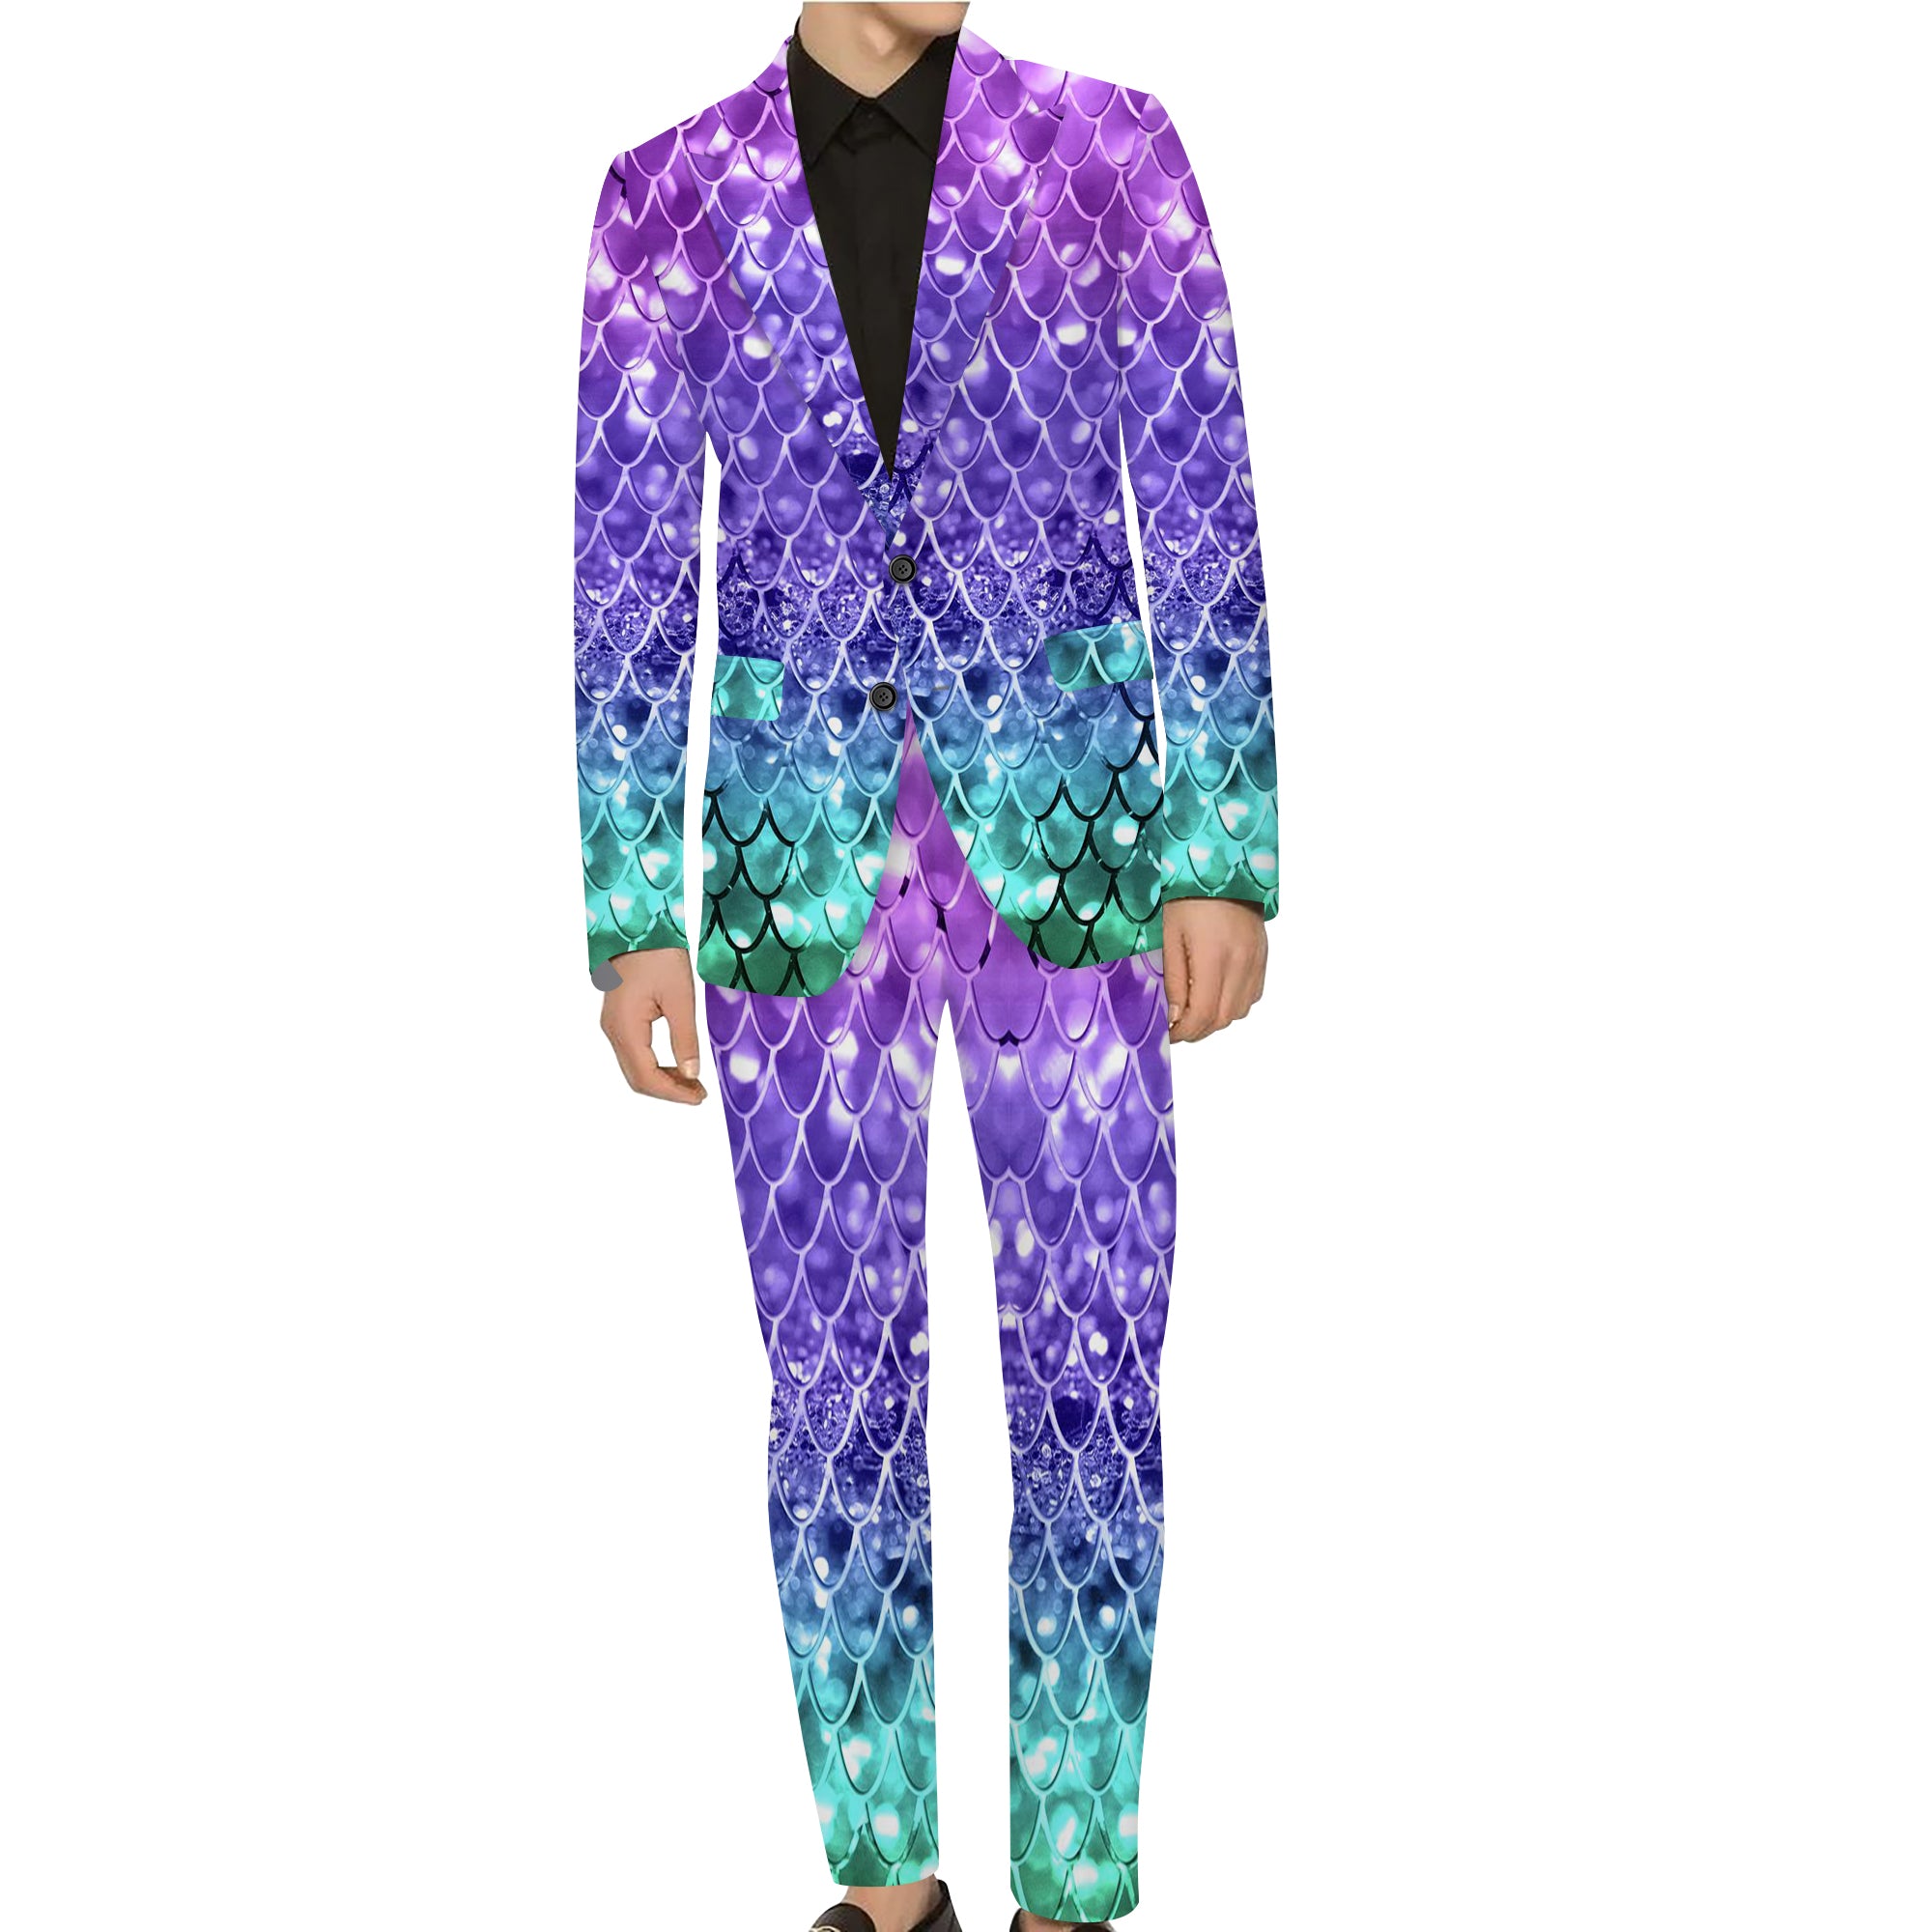 Rulercosplay Mermaid Scales Men Jacket Slim 2 Button Blazer Pants For Party